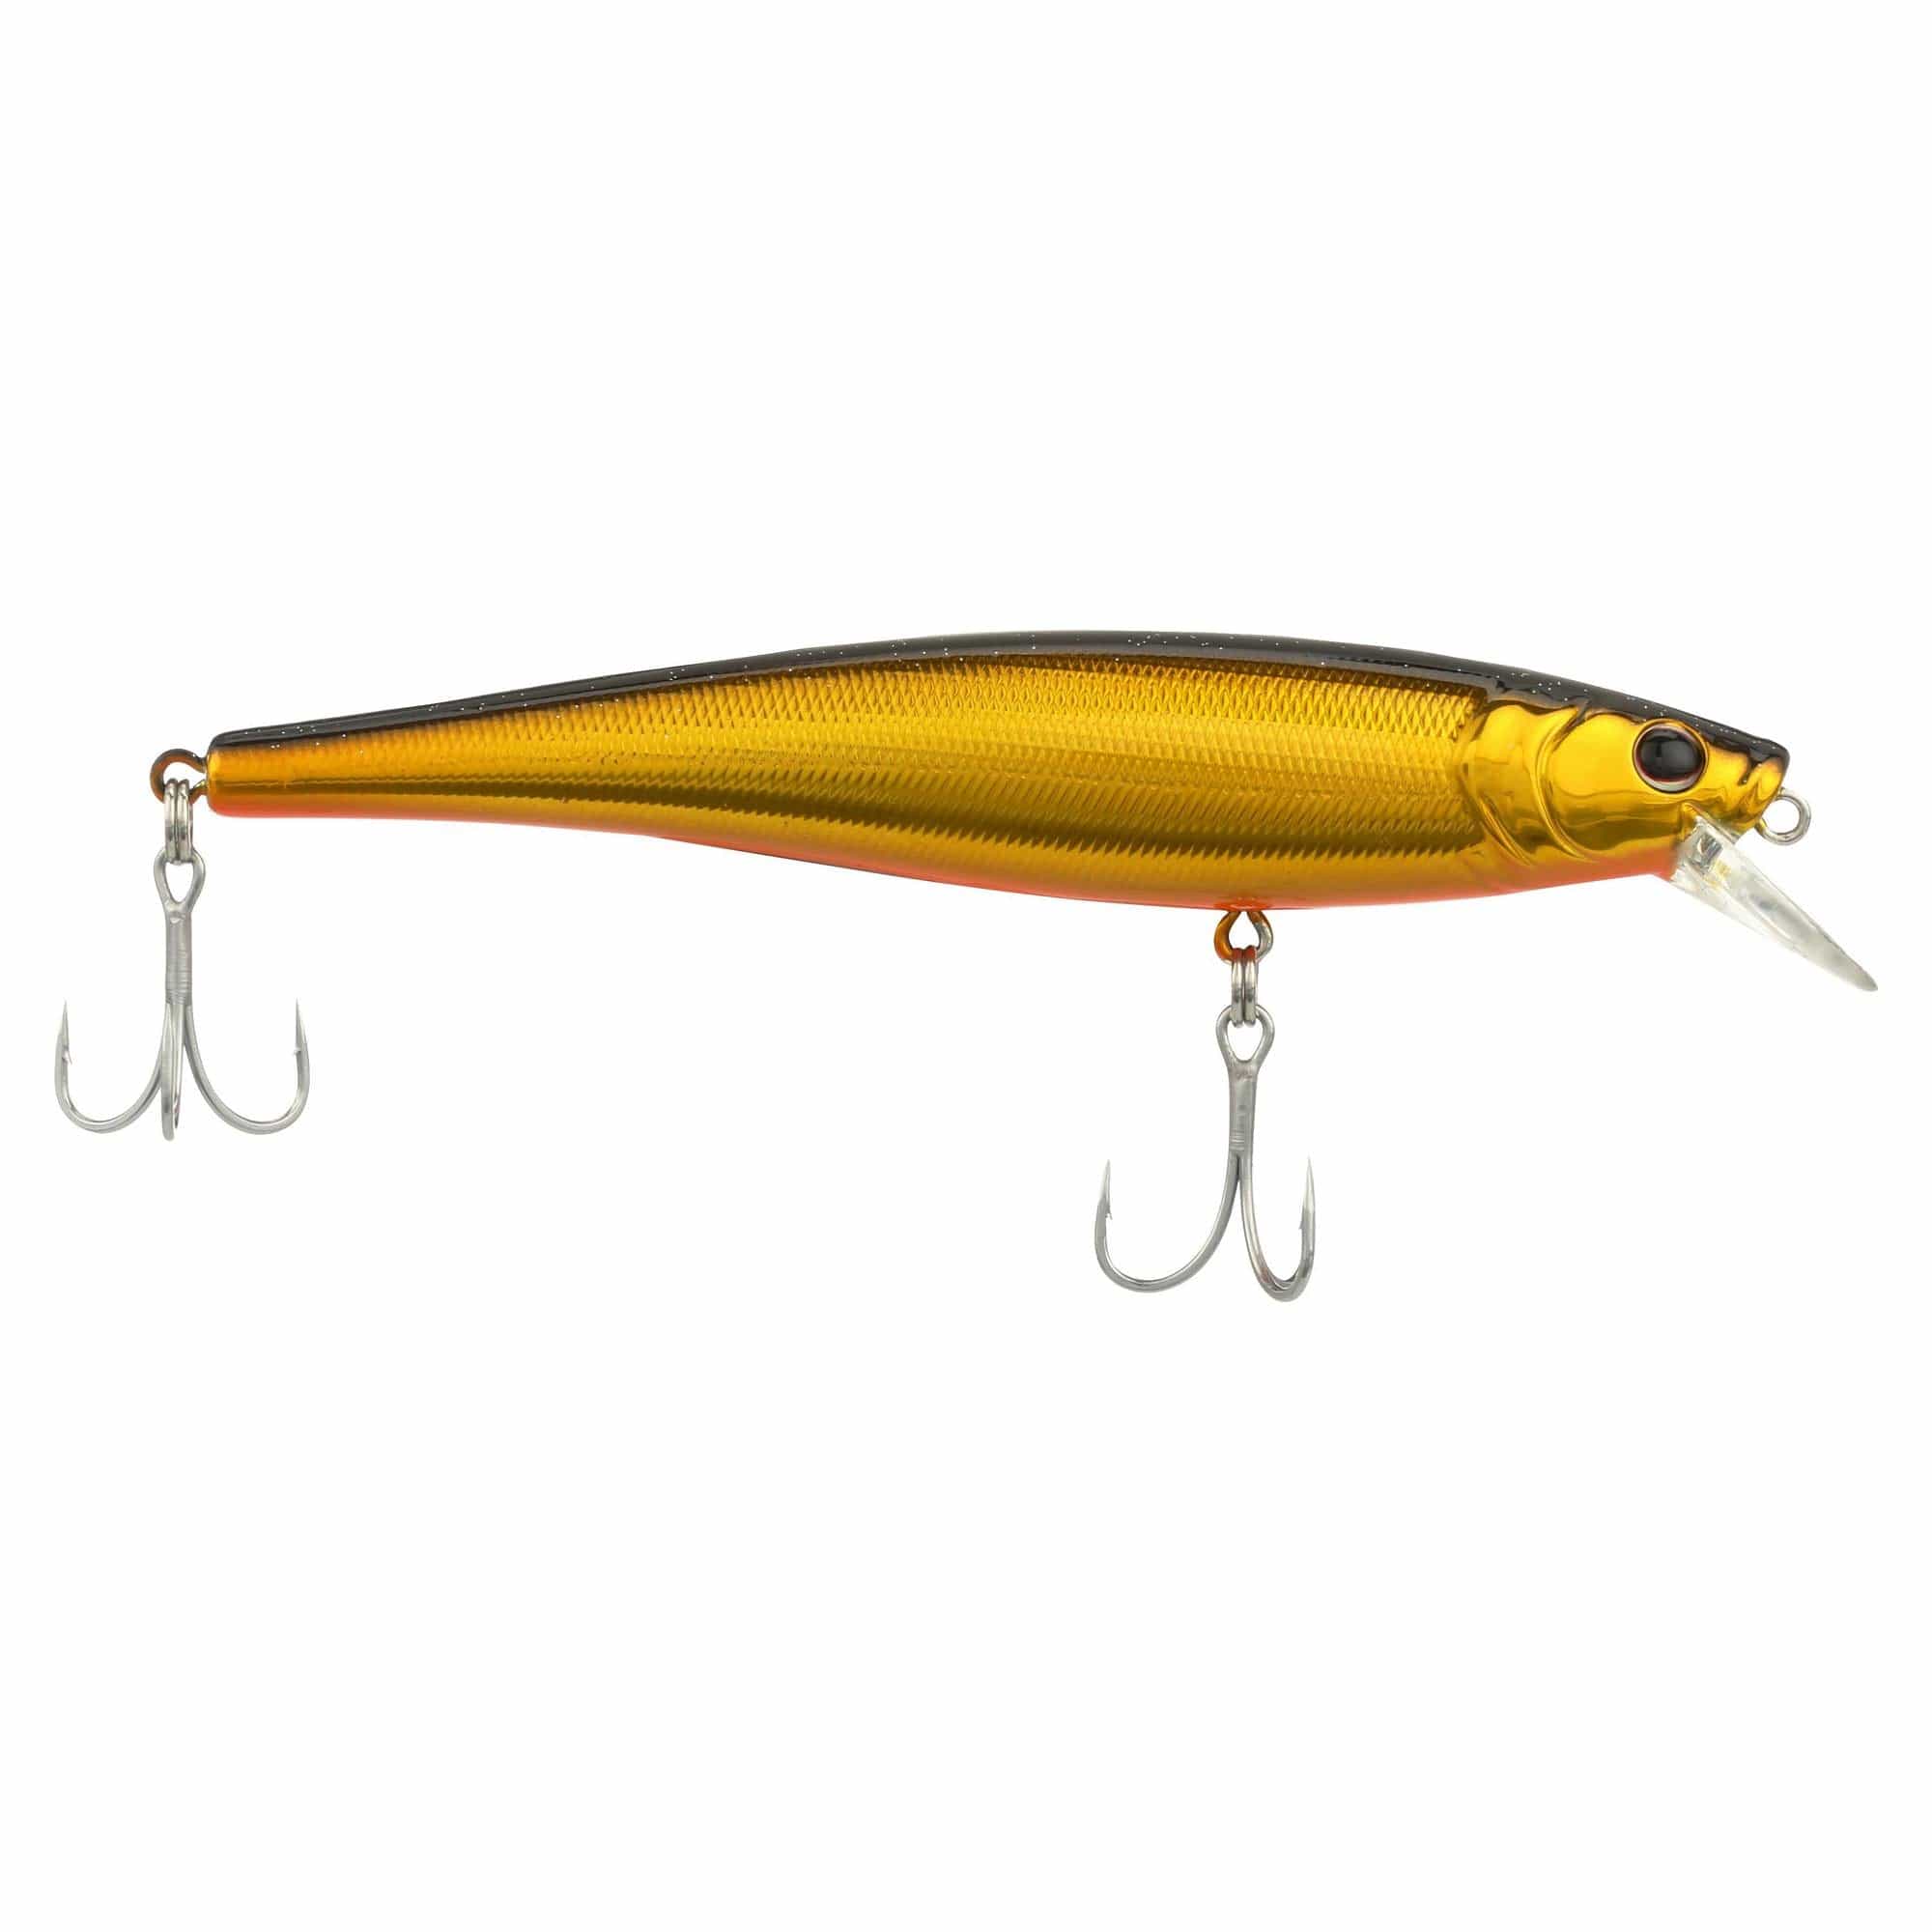 4.5 RF Gillman Glide Bait Bass Musky Striper Fishing Big Lure Multi  Jointed Shad Trout Kits Slow Sinking or Floating, Topwater Lures -   Canada